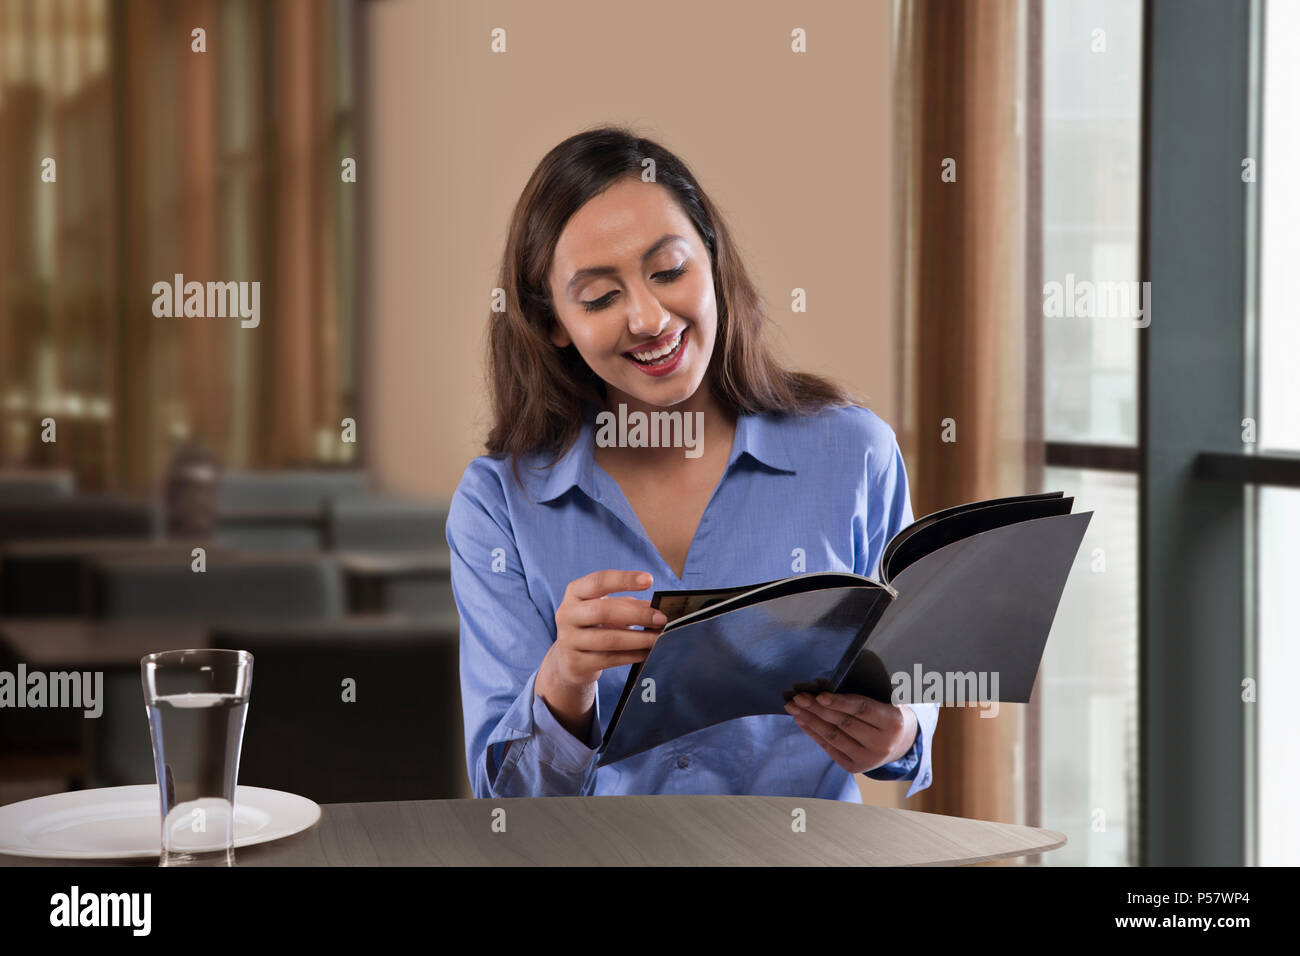 Businesswoman reading magazine on table Banque D'Images